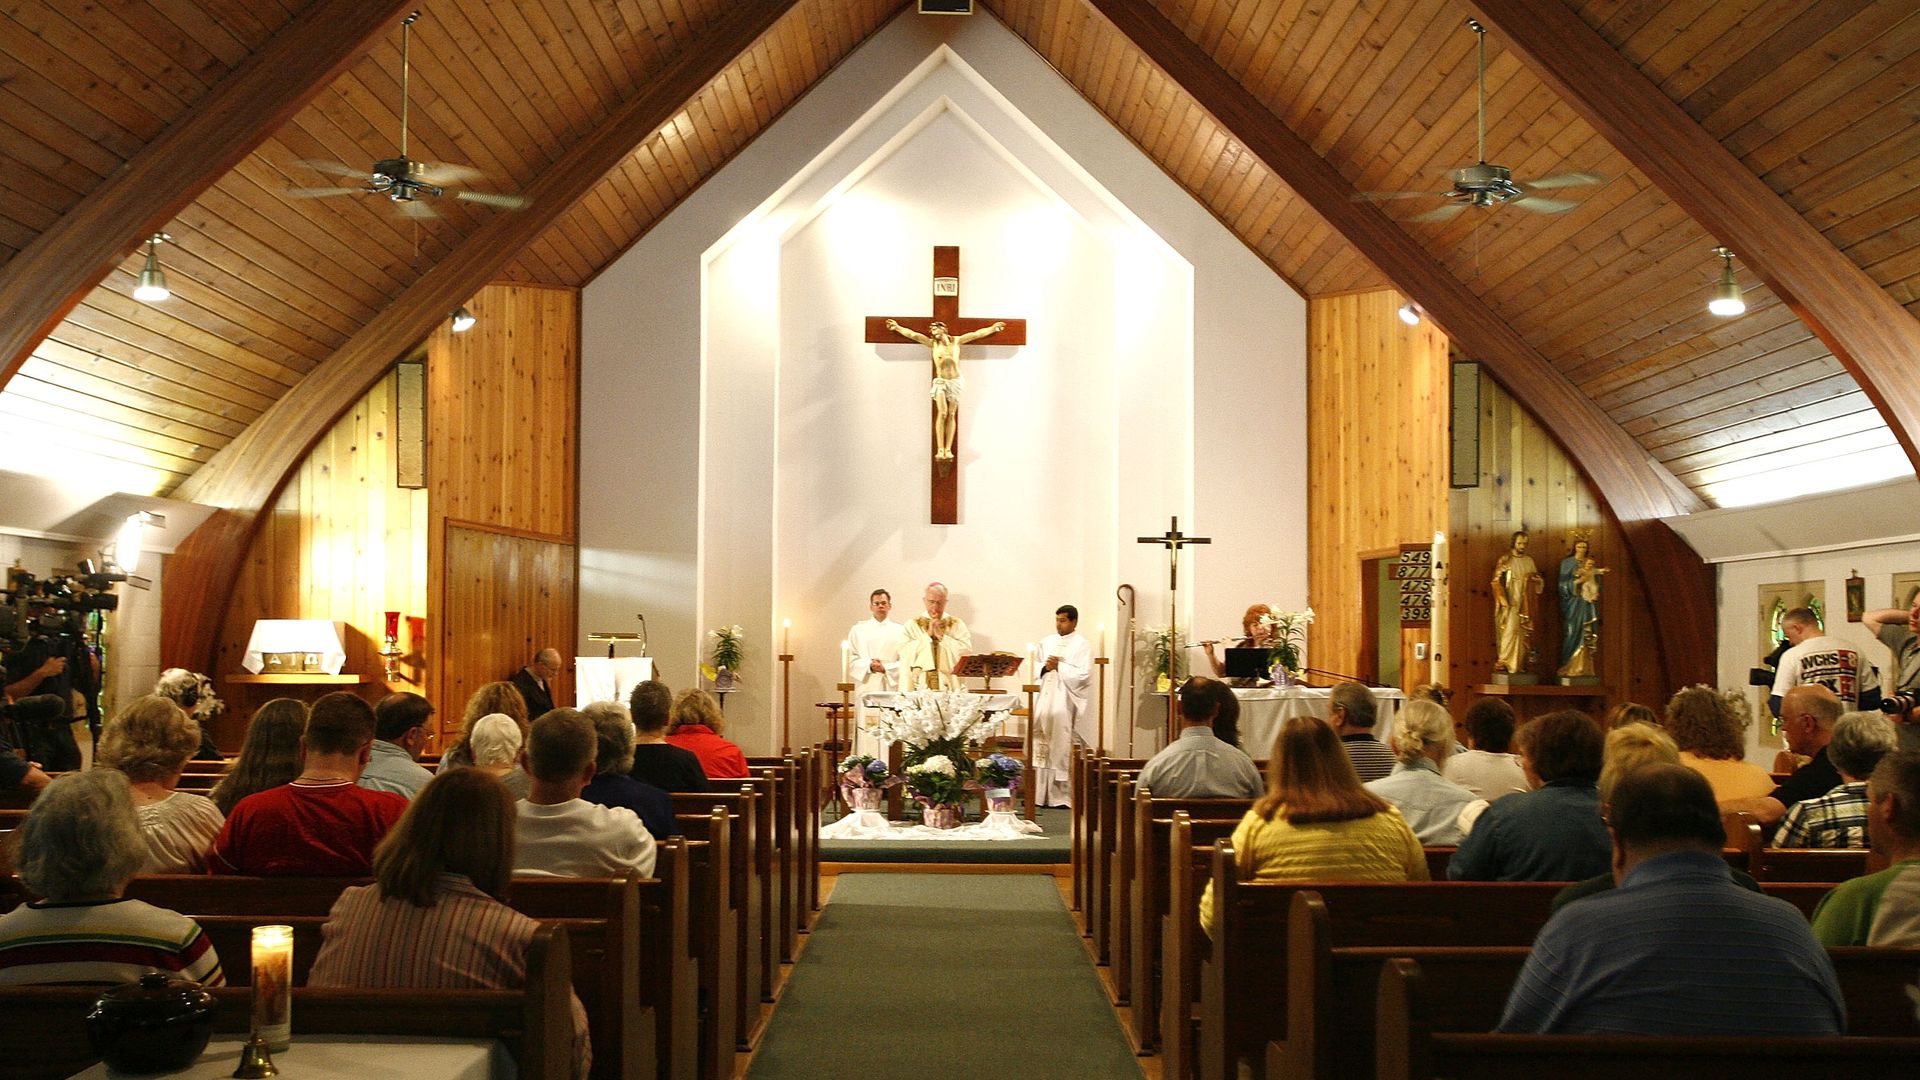 In this image, two rows of pews in a church are packed as church goers face a sermon being held in front of a white wall.